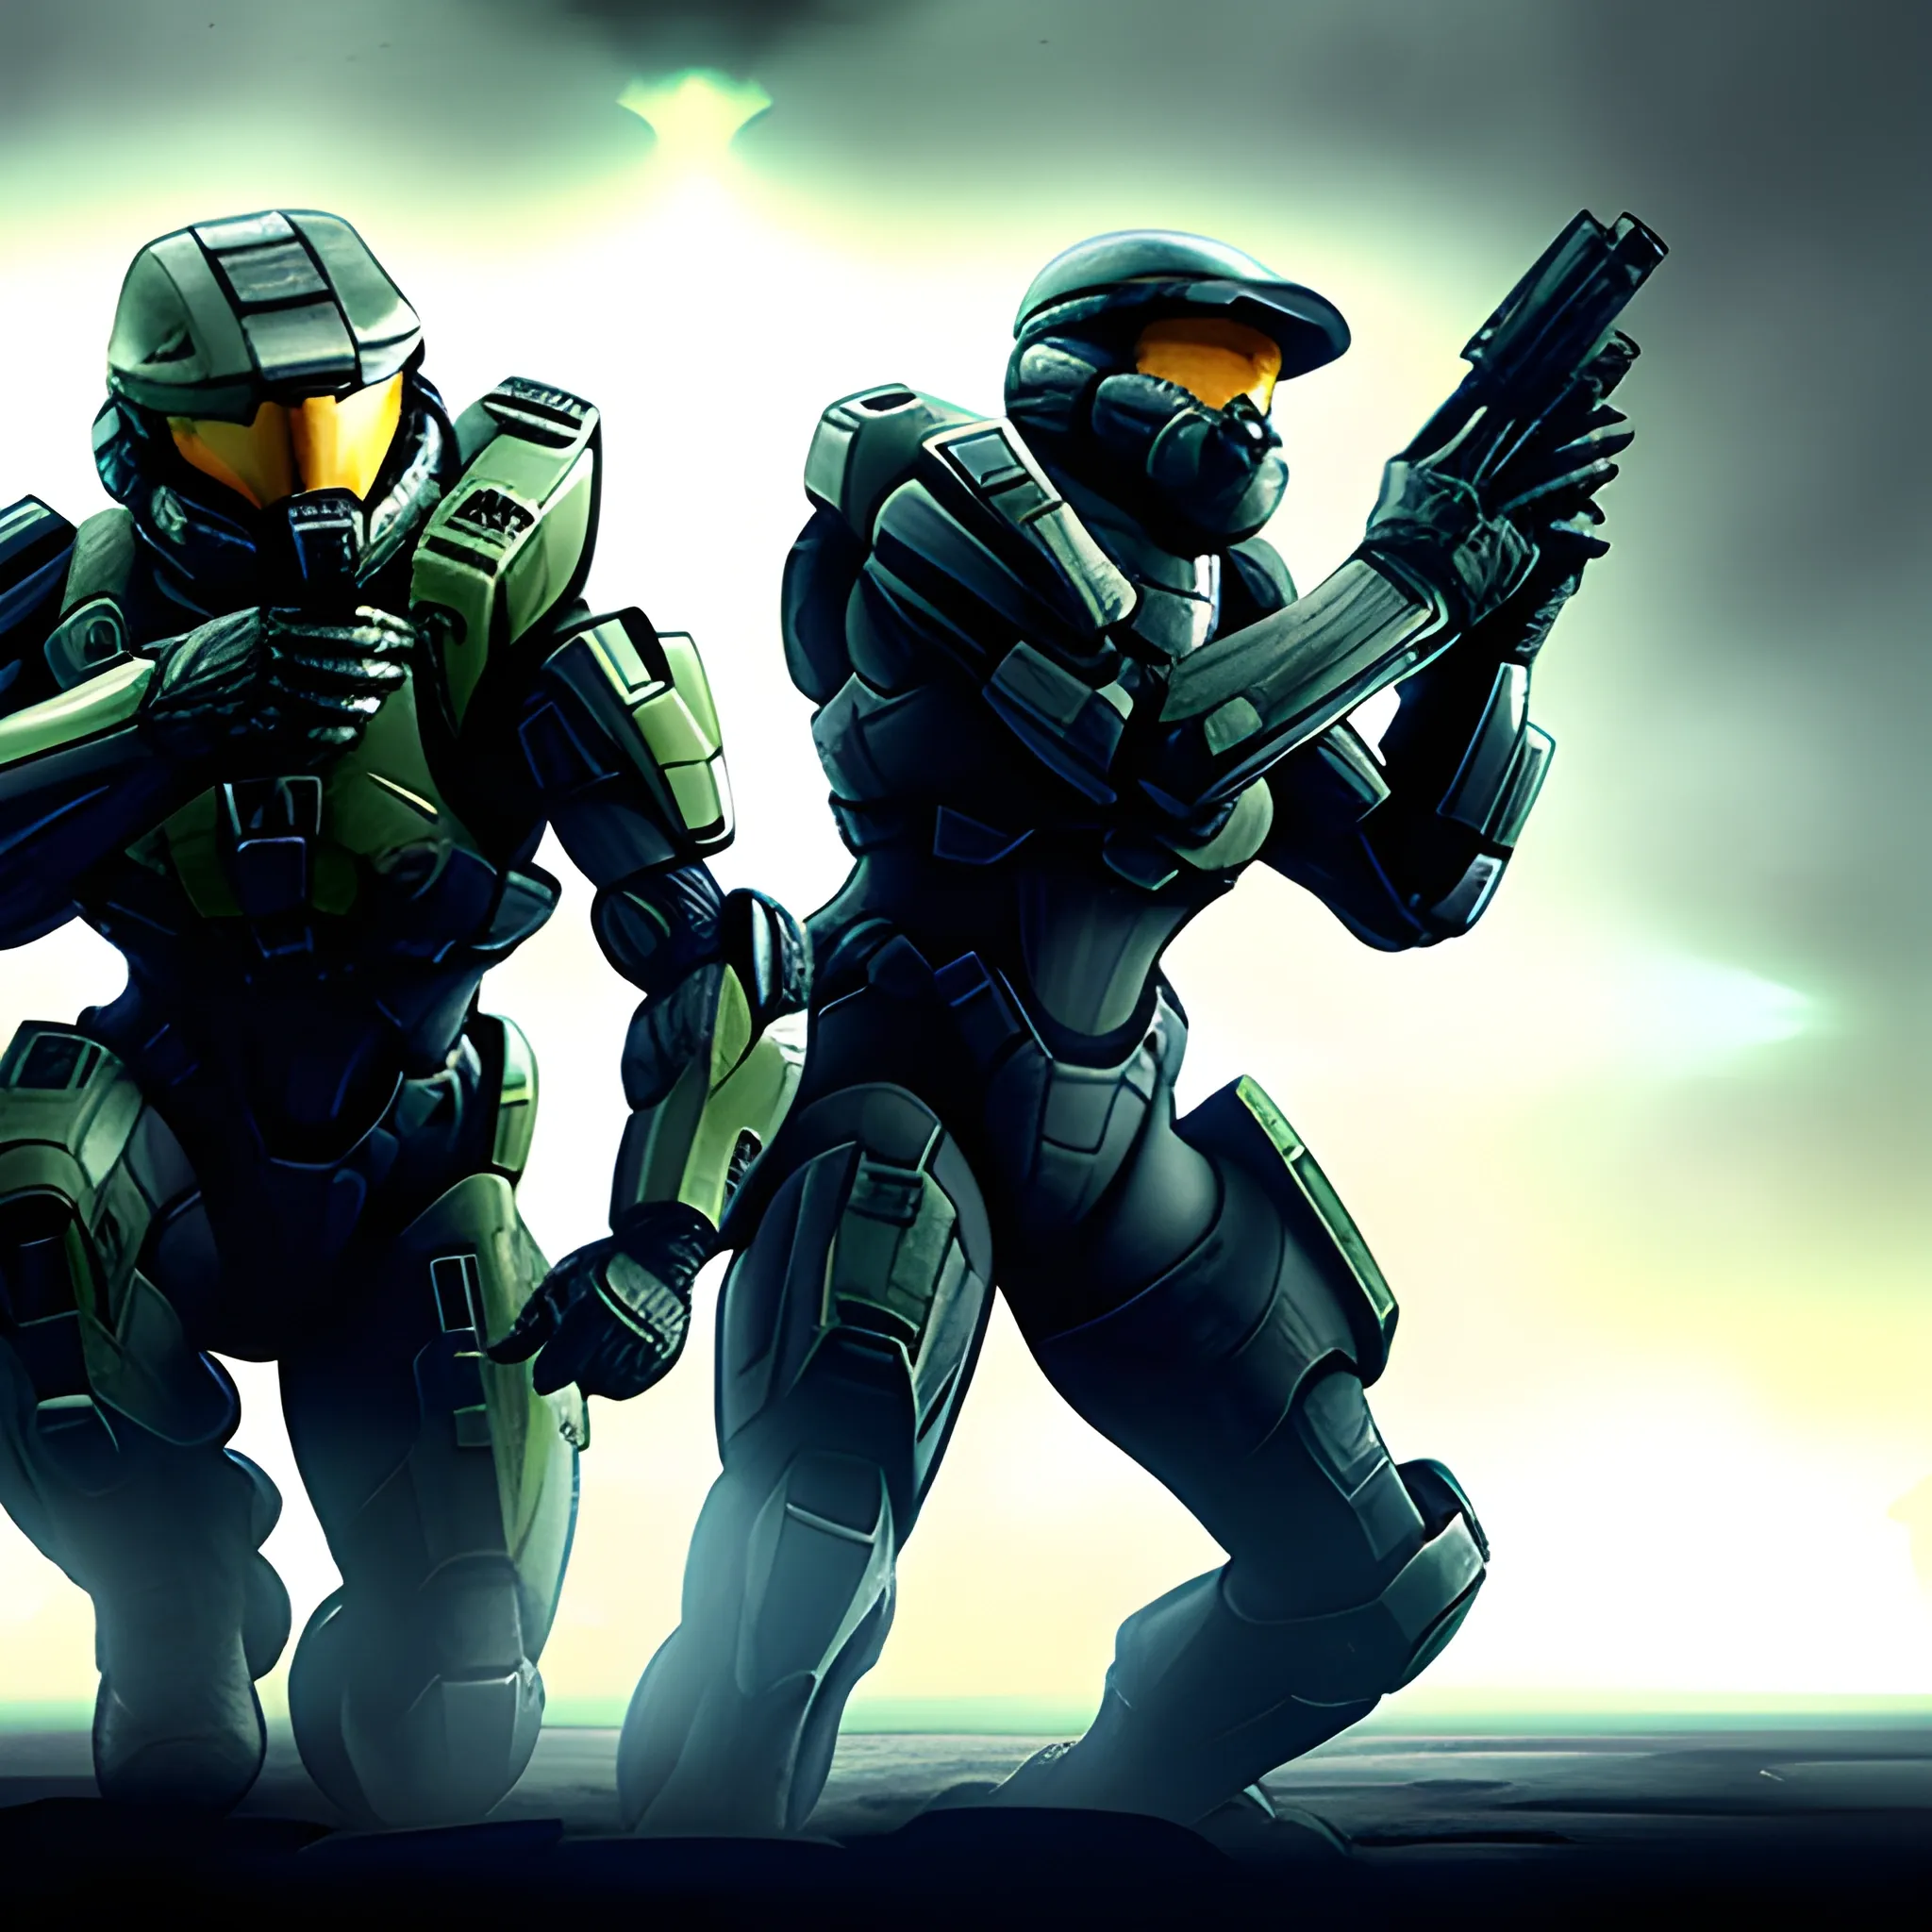 Halo Reach ODST's Fighting